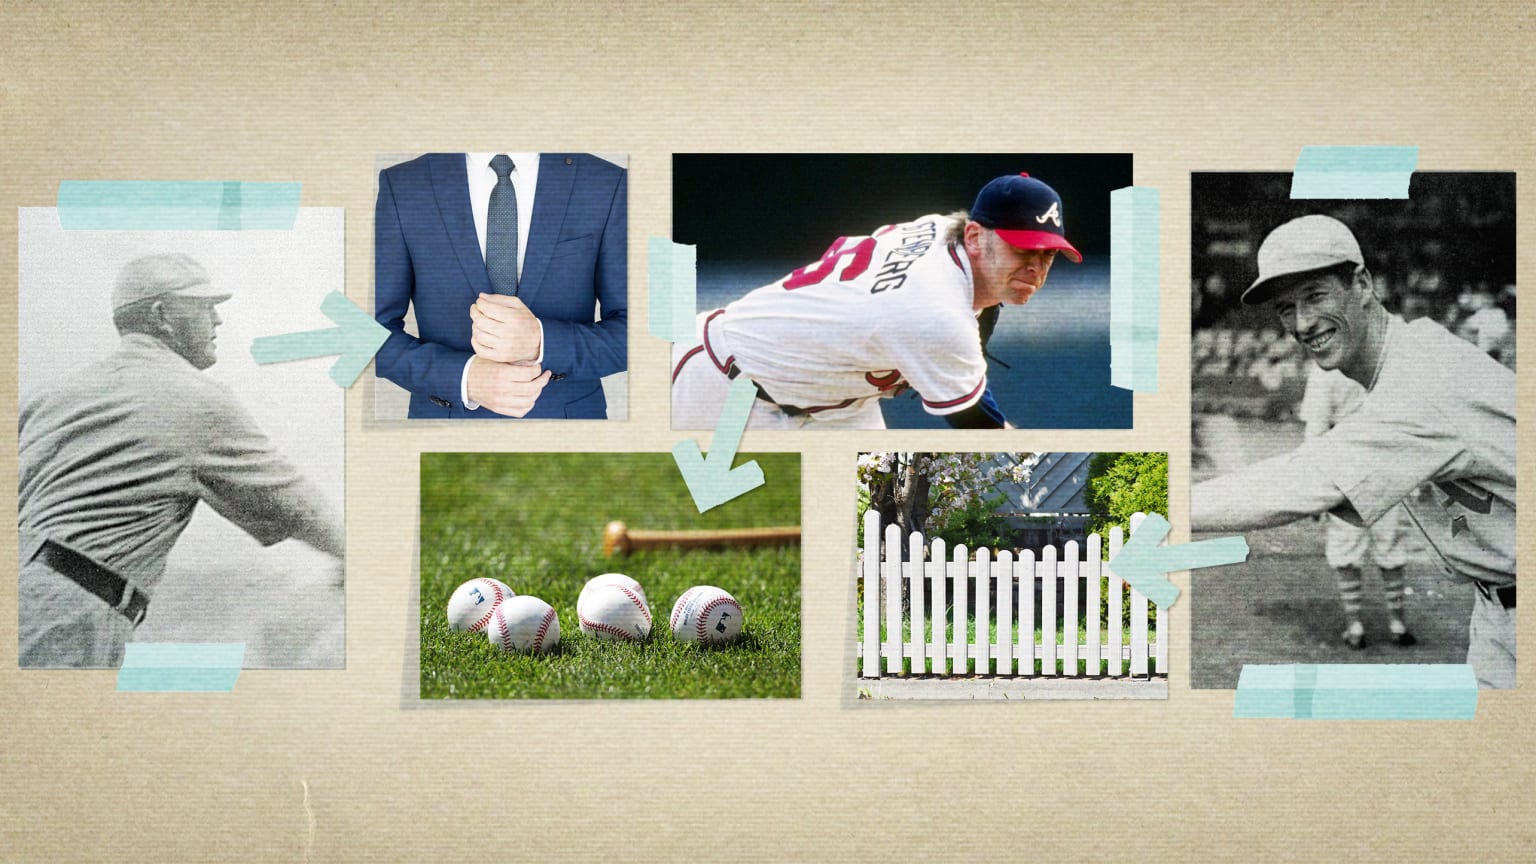 A photo illustration of 3 images of baseball players with arrows pointing to a man's suit, four baseballs on the grass, and a fence